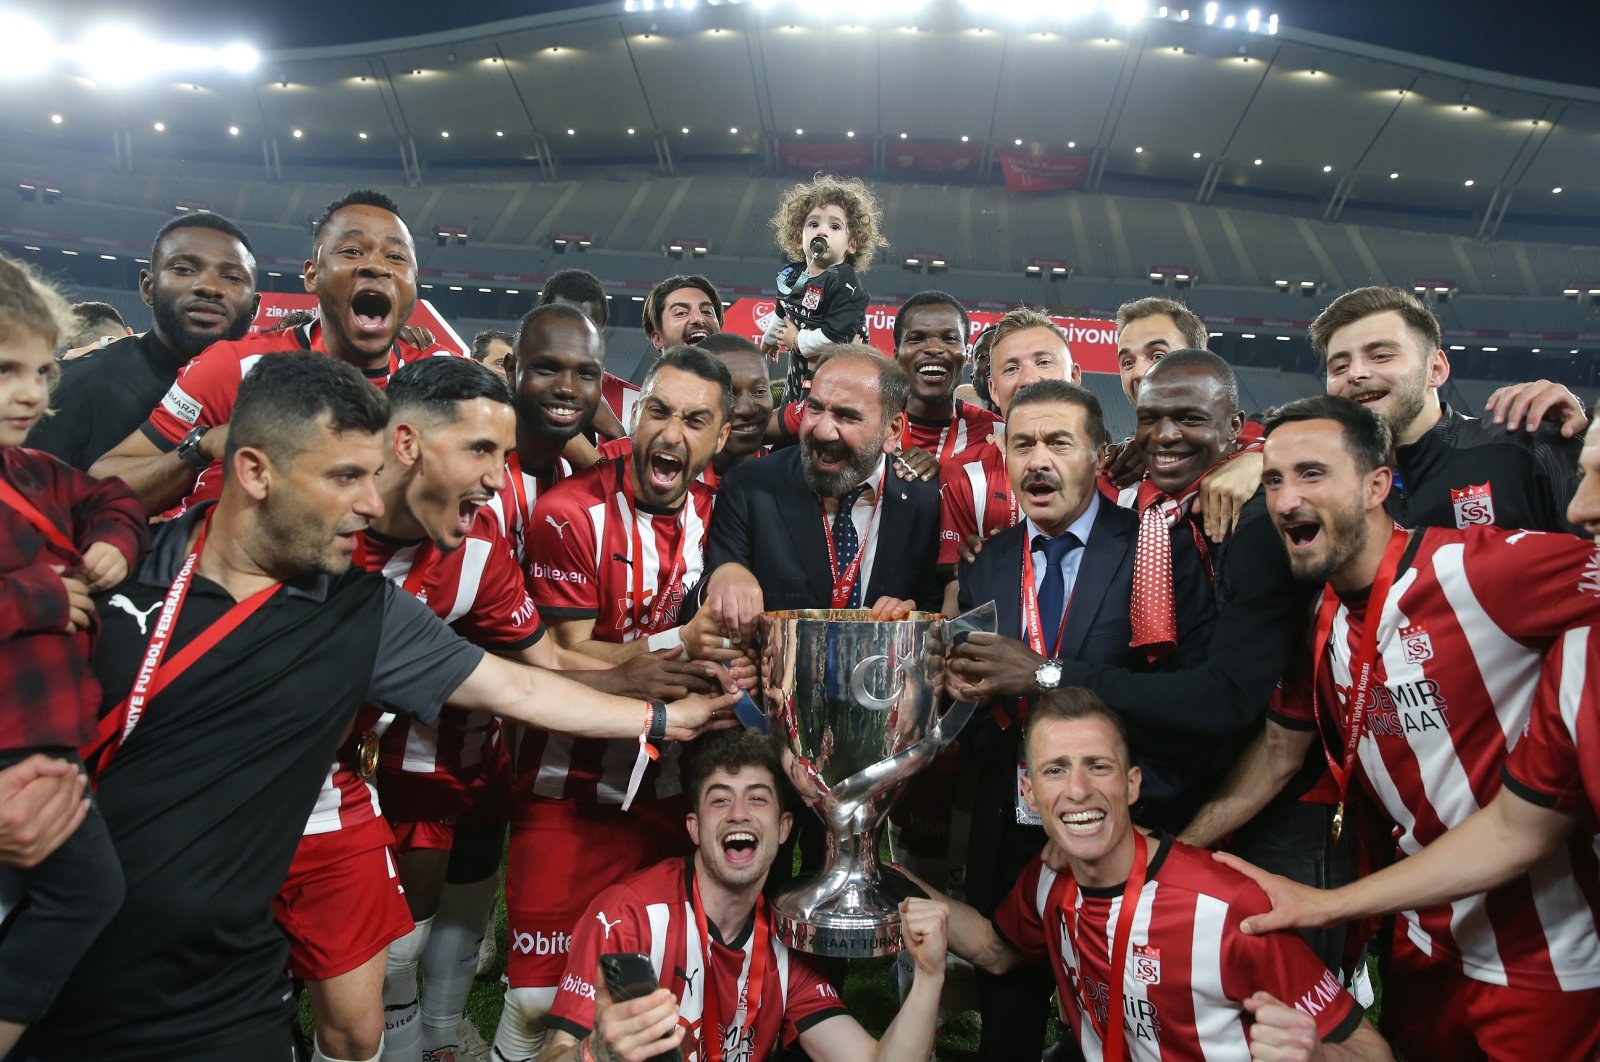 Sivasspor players celebrate their victory in the Turkish Cup final against Kayserispor at the Atatürk Olympic Stadium in Istanbul, on May 26, 2022. (DHA Photo)